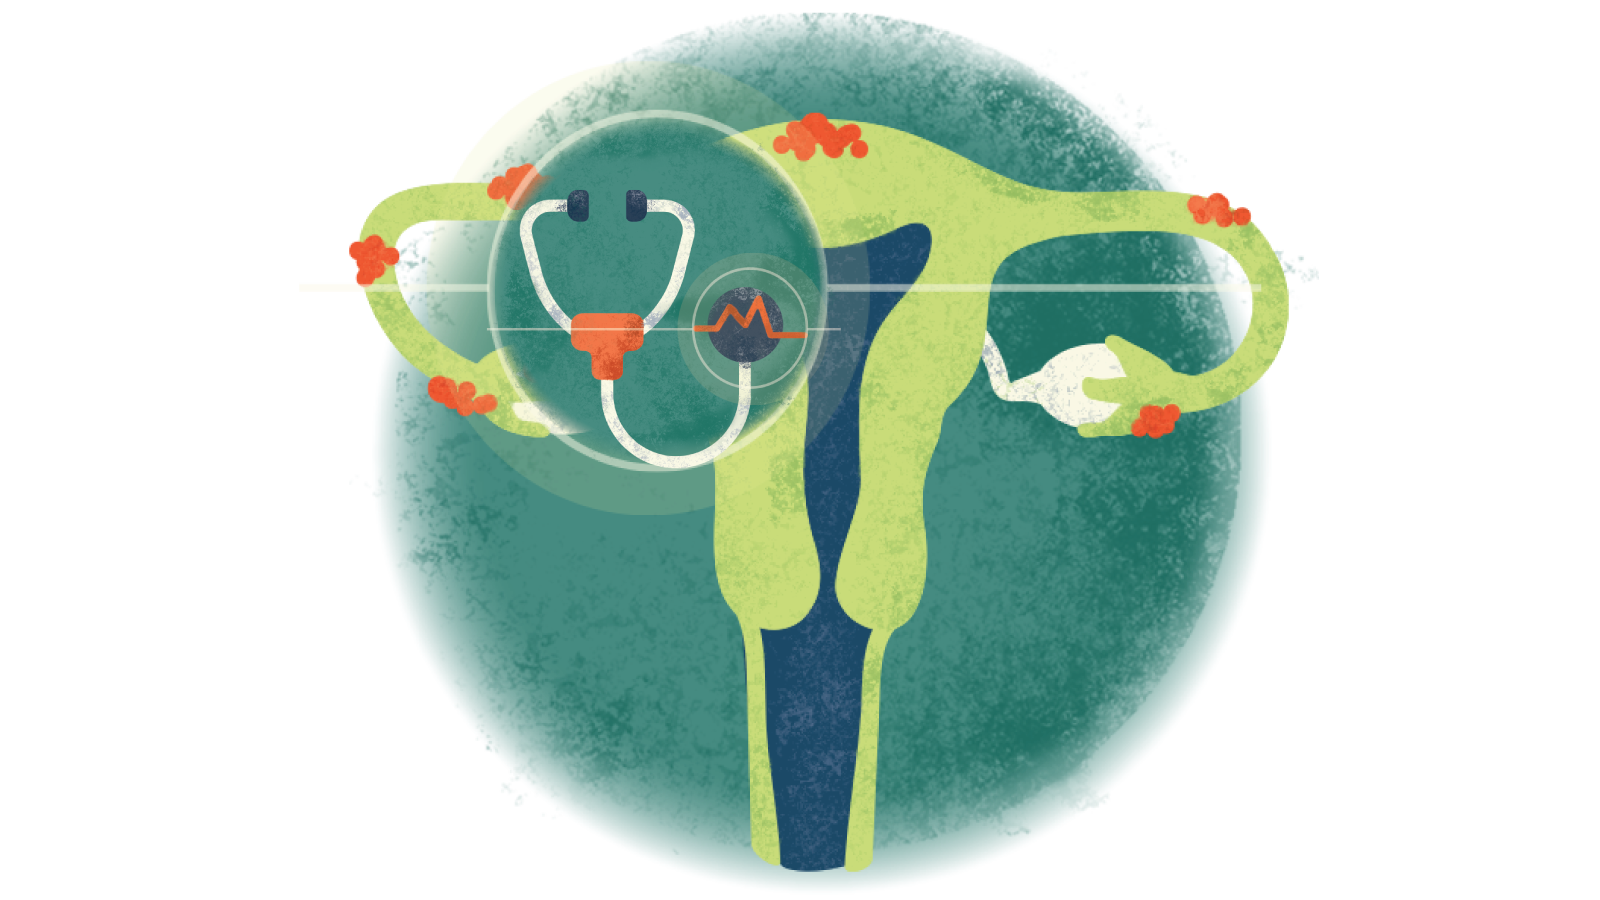 Illustration of a stethoscope with an electrocardiogram over a uterus with endometriosis